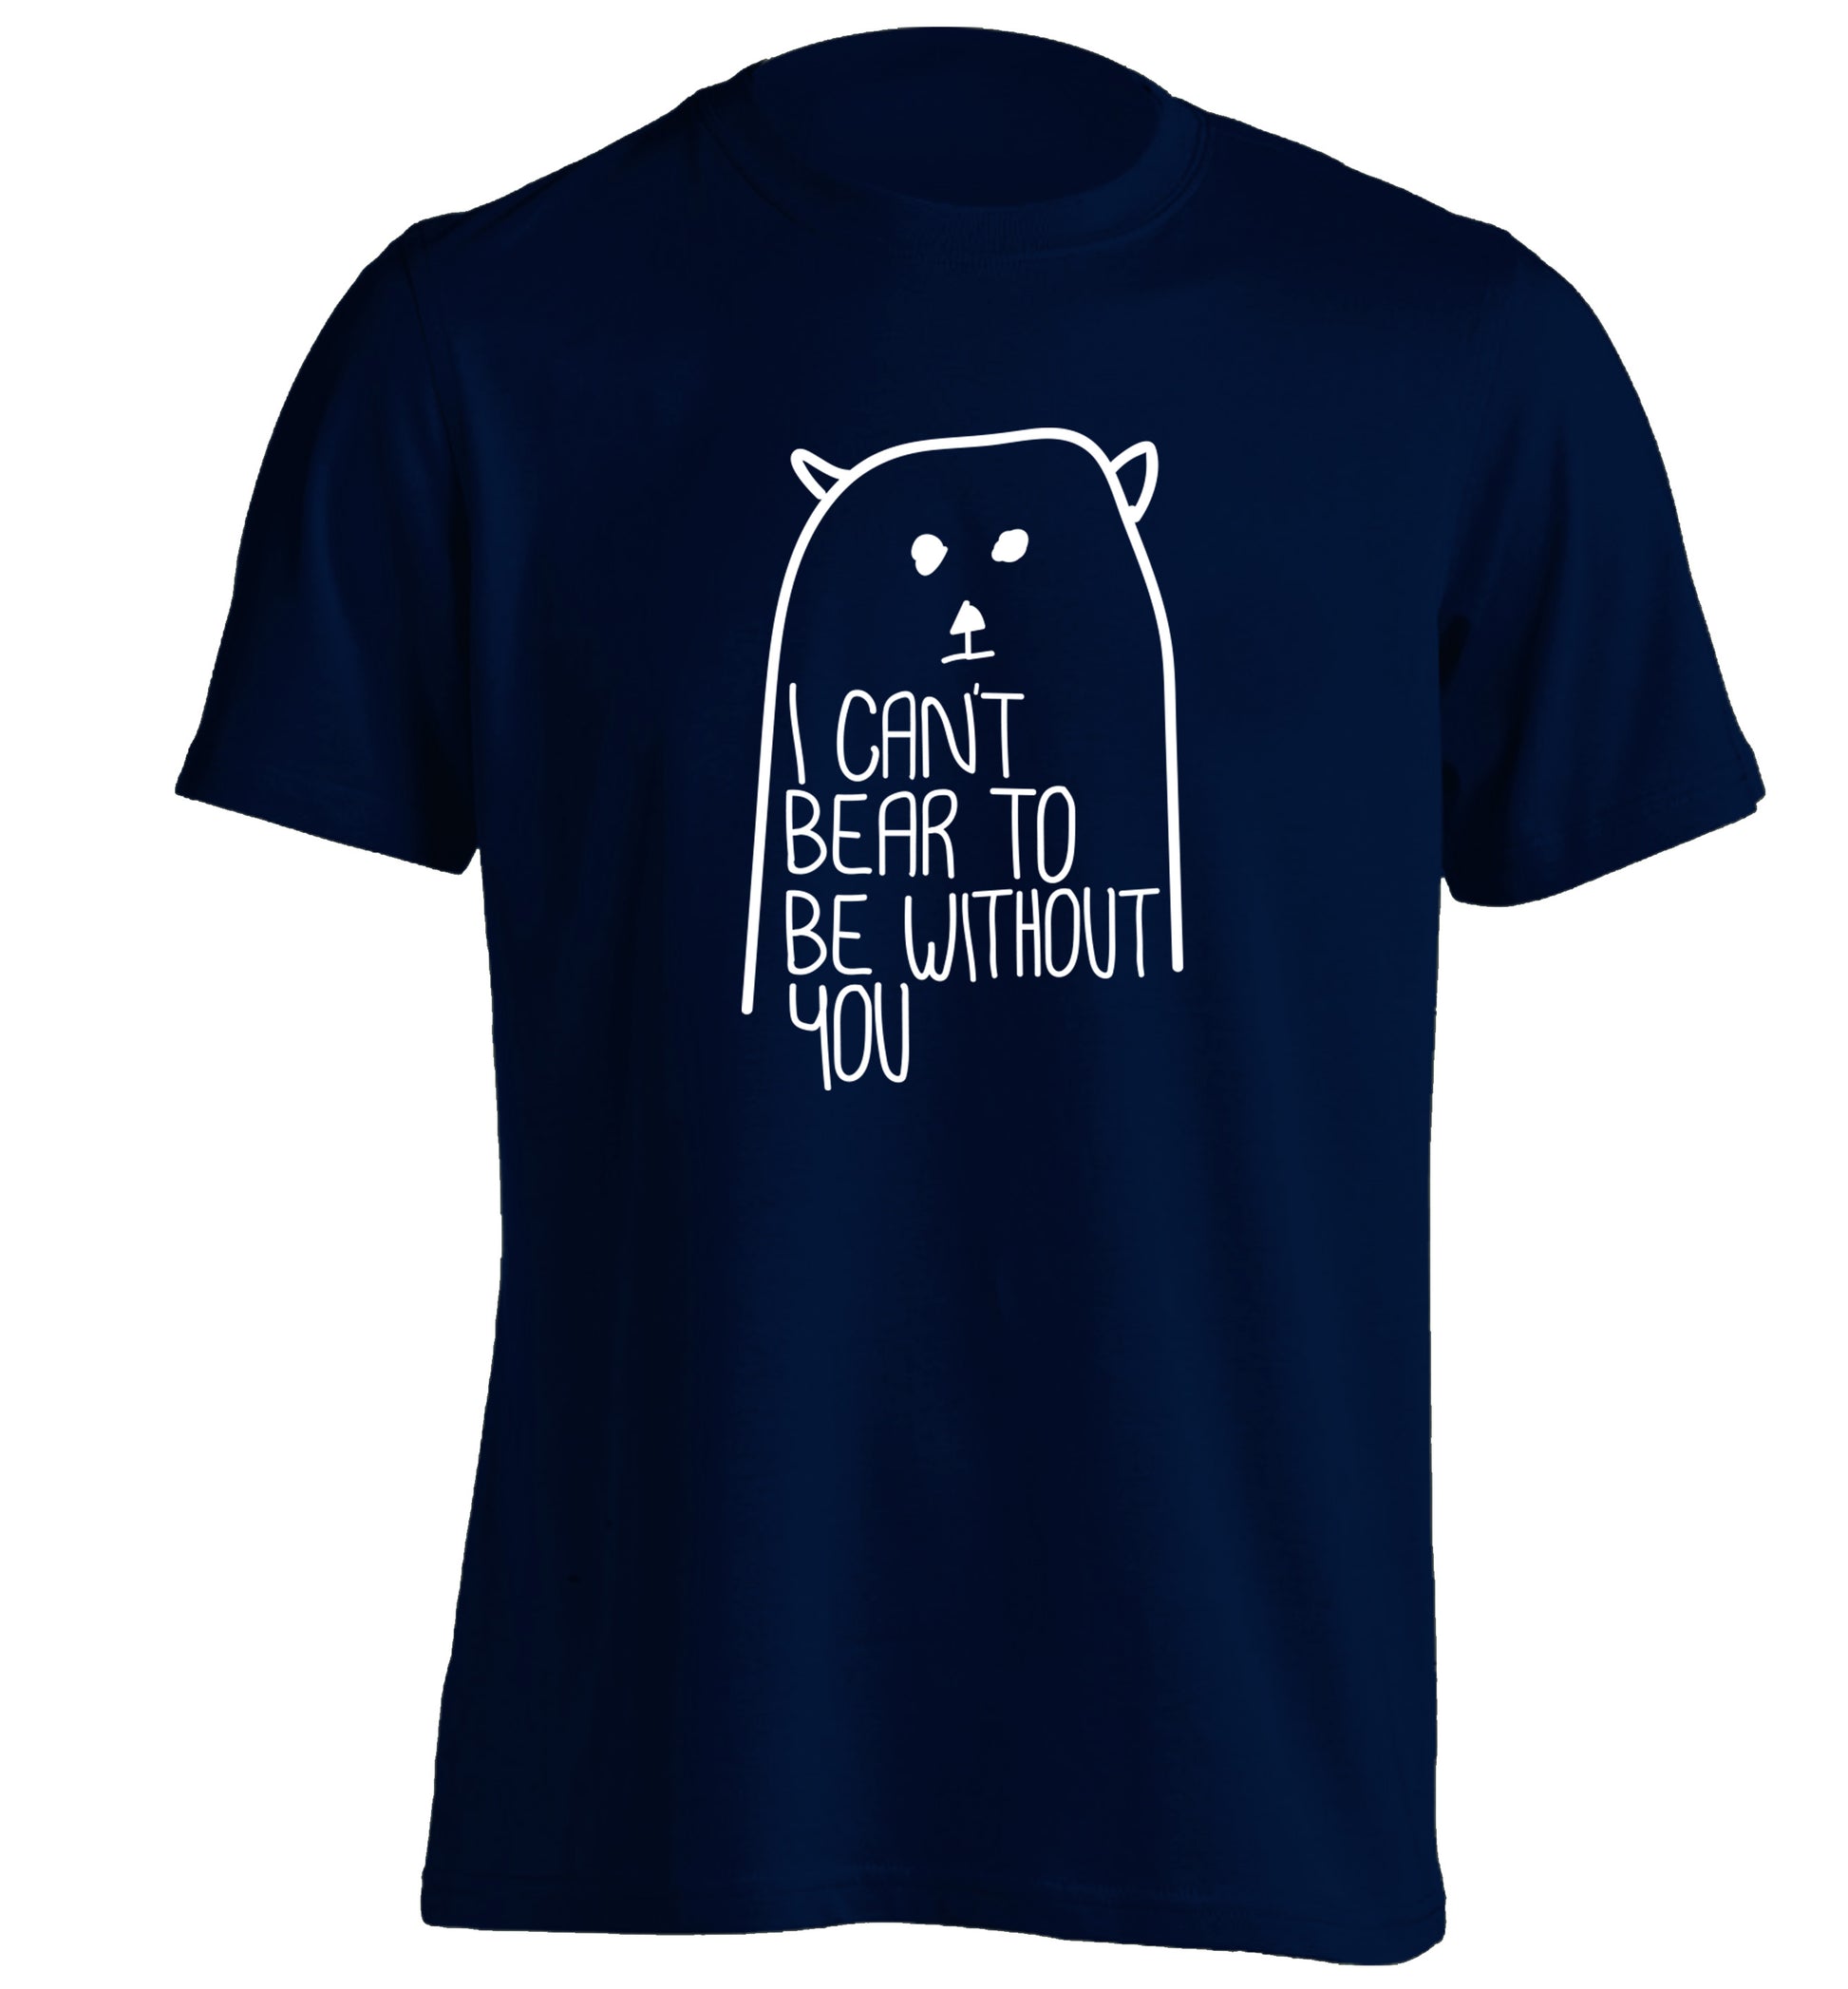 I can't bear to be without you adults unisex navy Tshirt 2XL